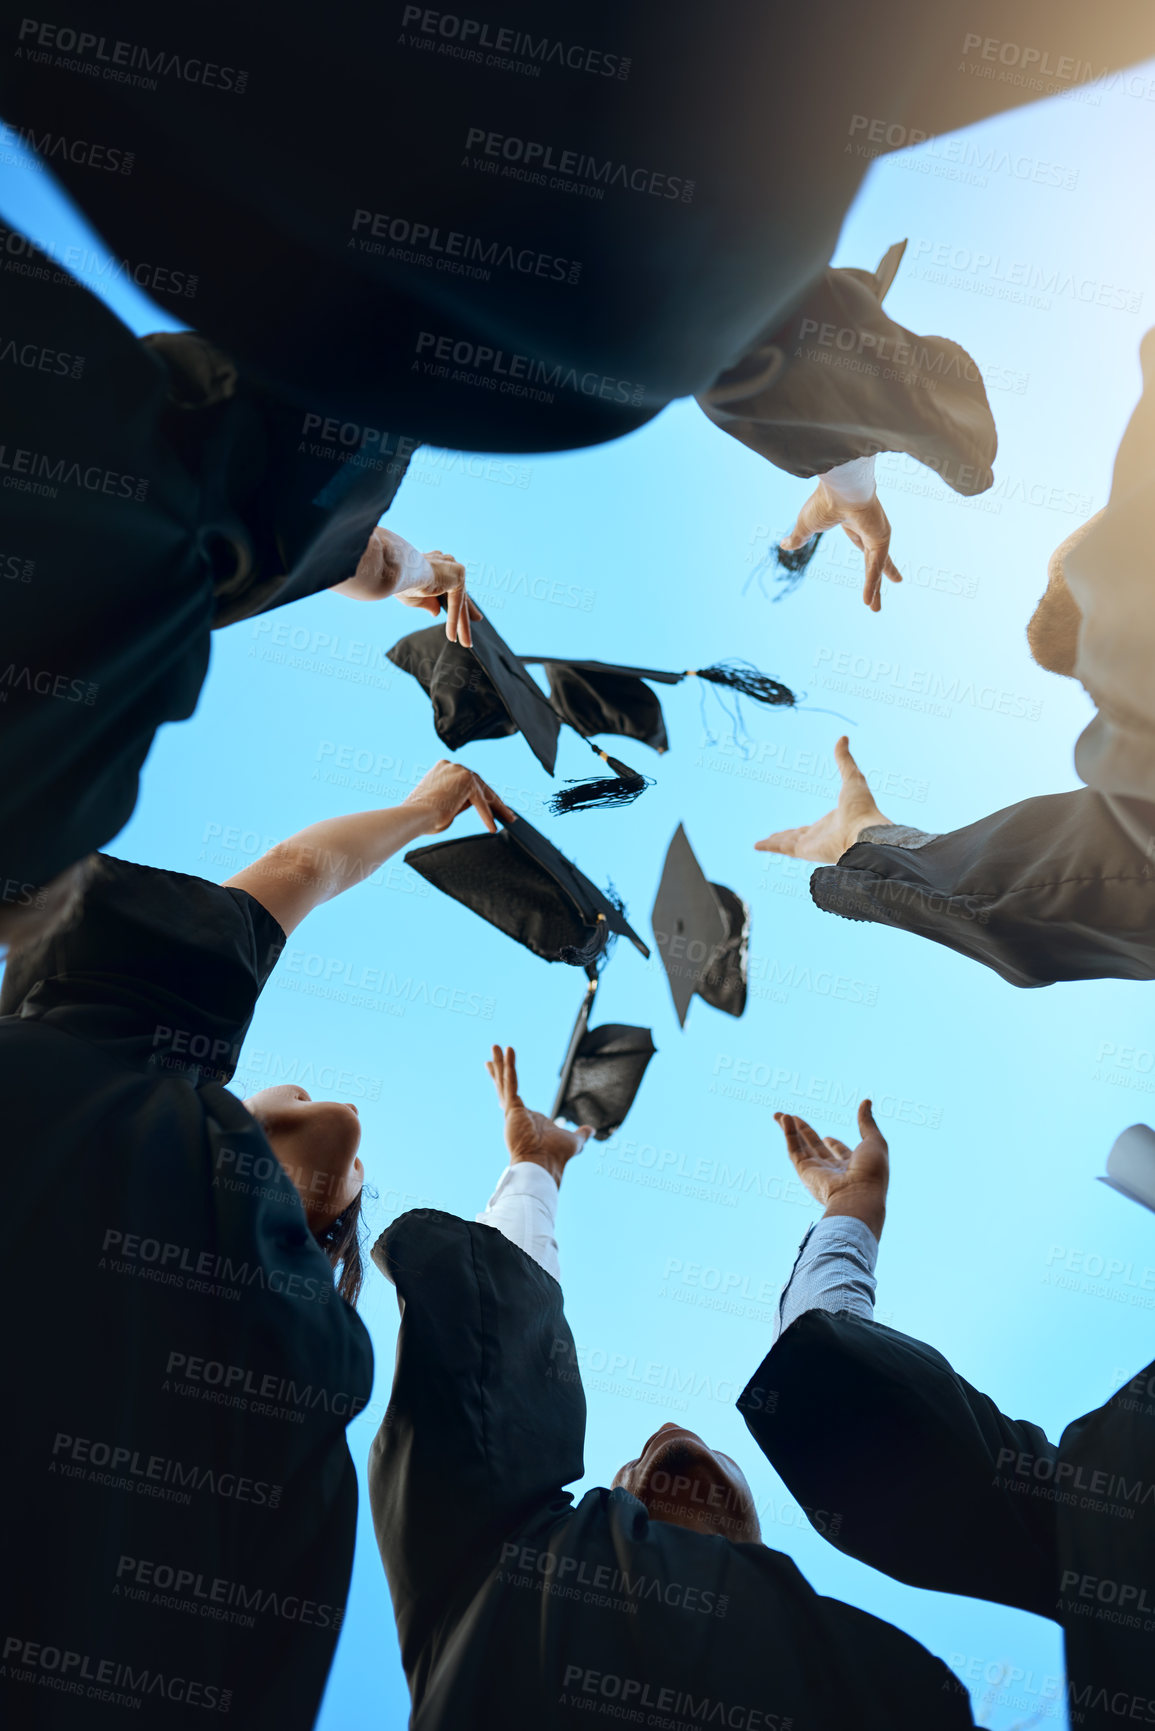 Buy stock photo Low angle shot of a group of young students throwing their hats in the air on graduation day